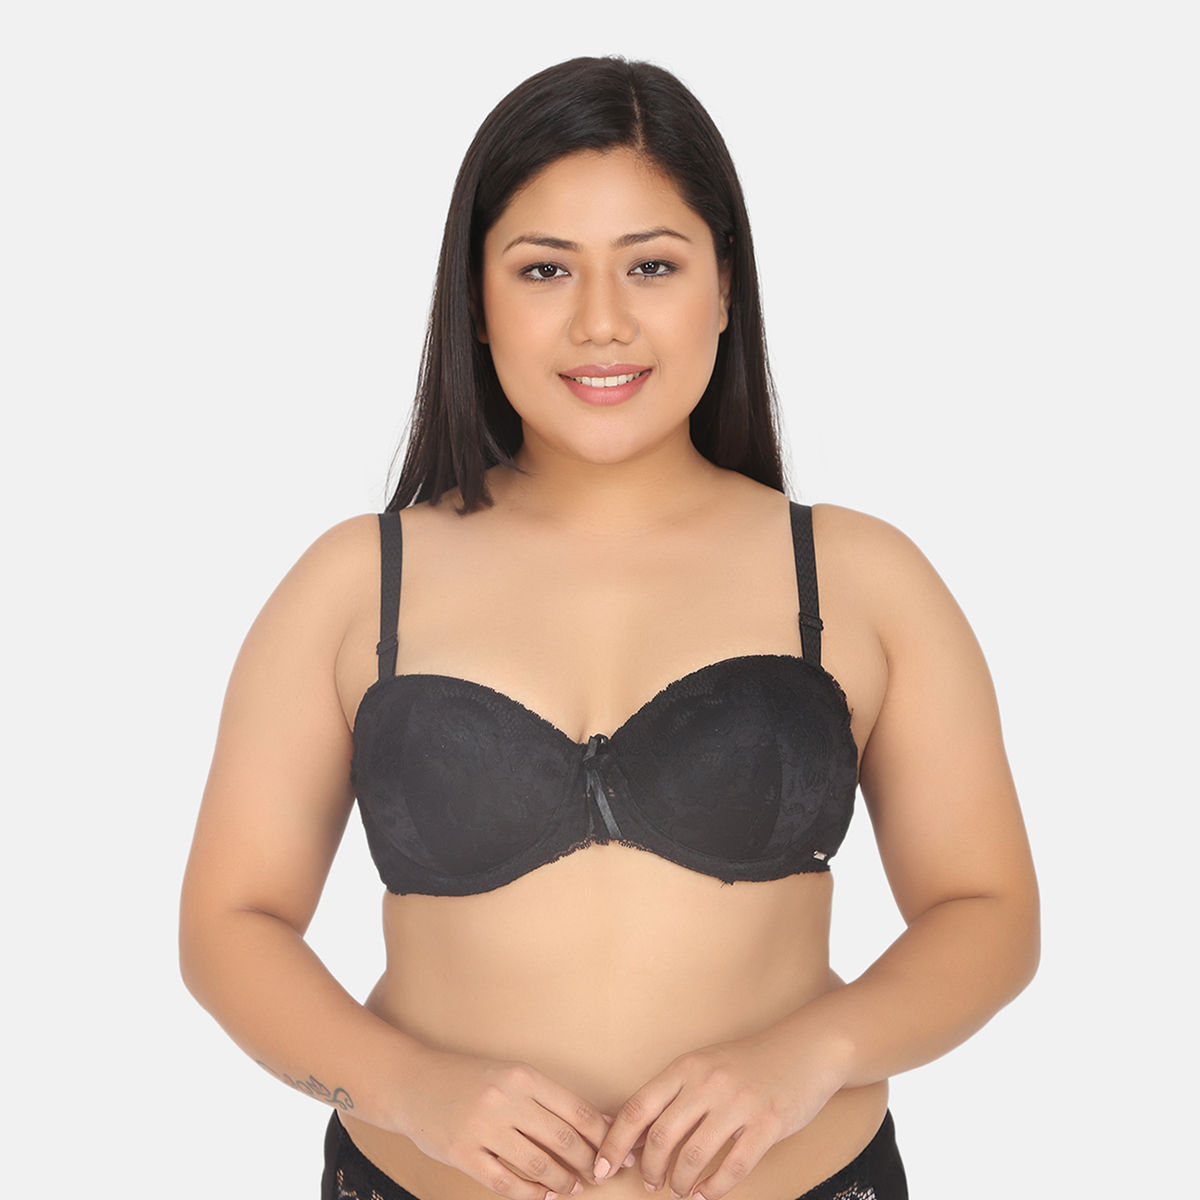 Curvy Love Plus Size Padded Medium Coverage Balconette Bra Black: Buy Curvy Love Plus Size Padded Medium Coverage Balconette Bra - Black Online Best Price in India | Nykaa